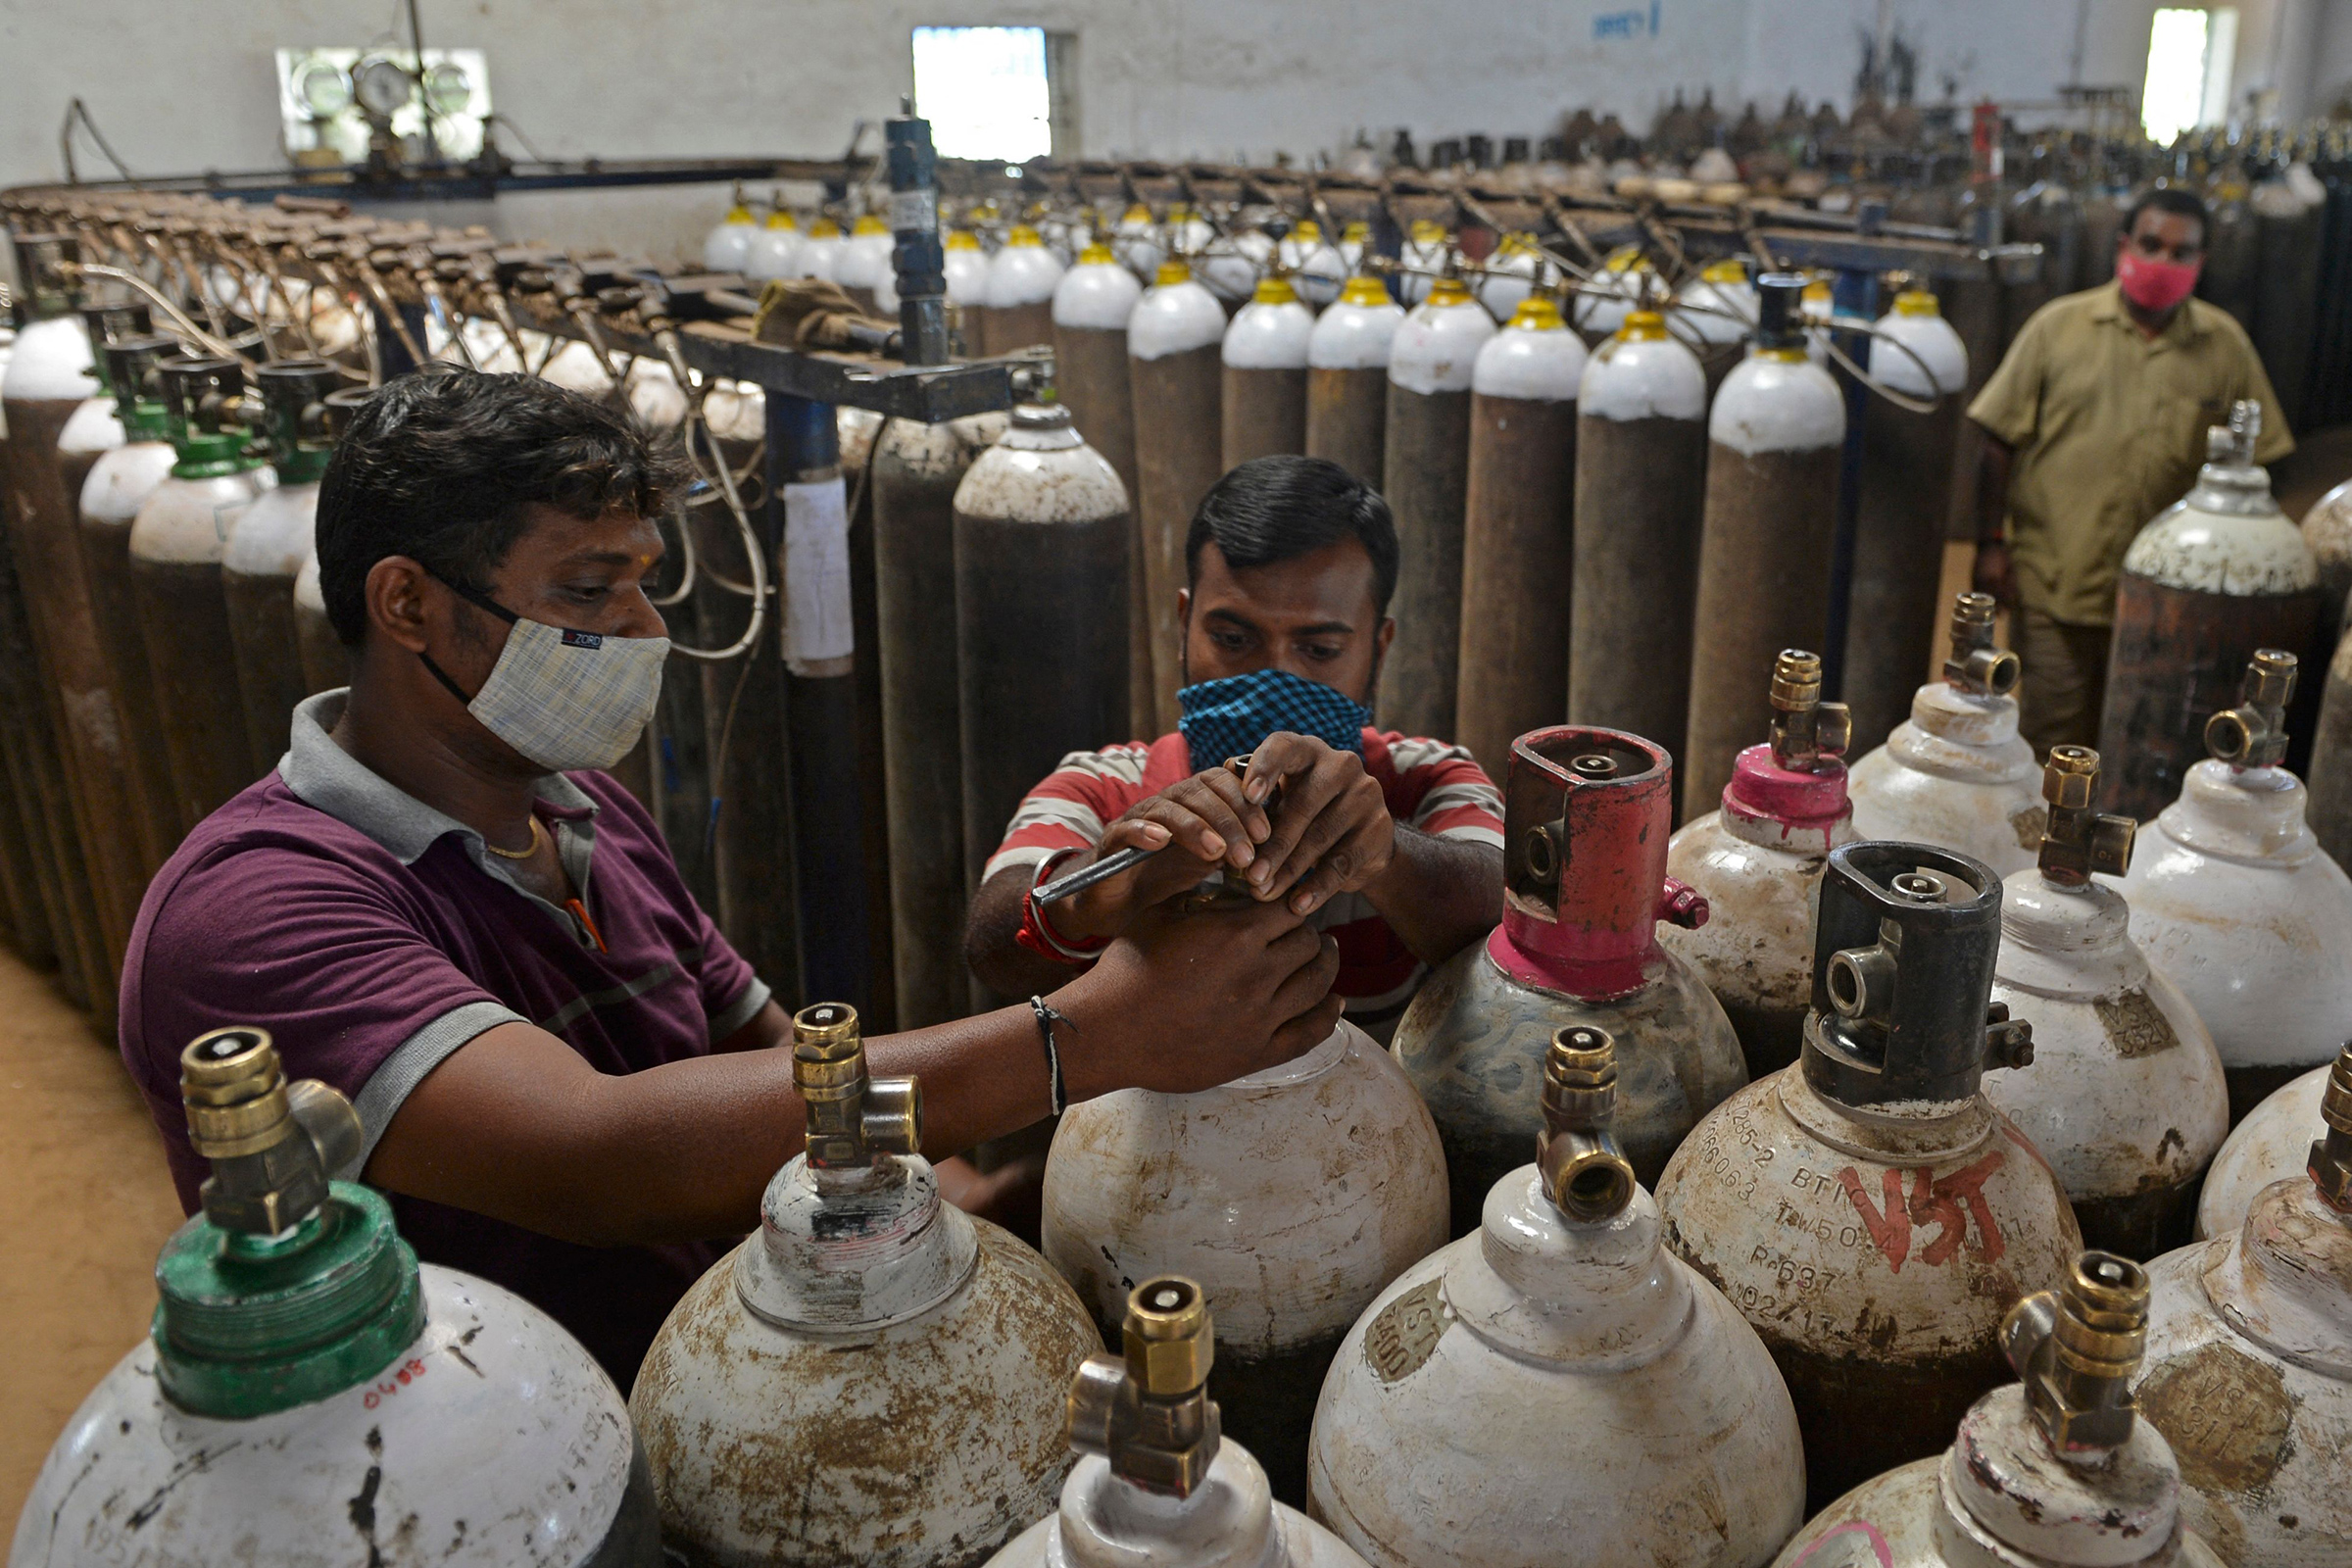 At a facility on the outskirts of Chennai on April 24, workers check medical oxygen cylinders that will be transported to hospitals. (Arun Sankar—AFP/Getty Images)